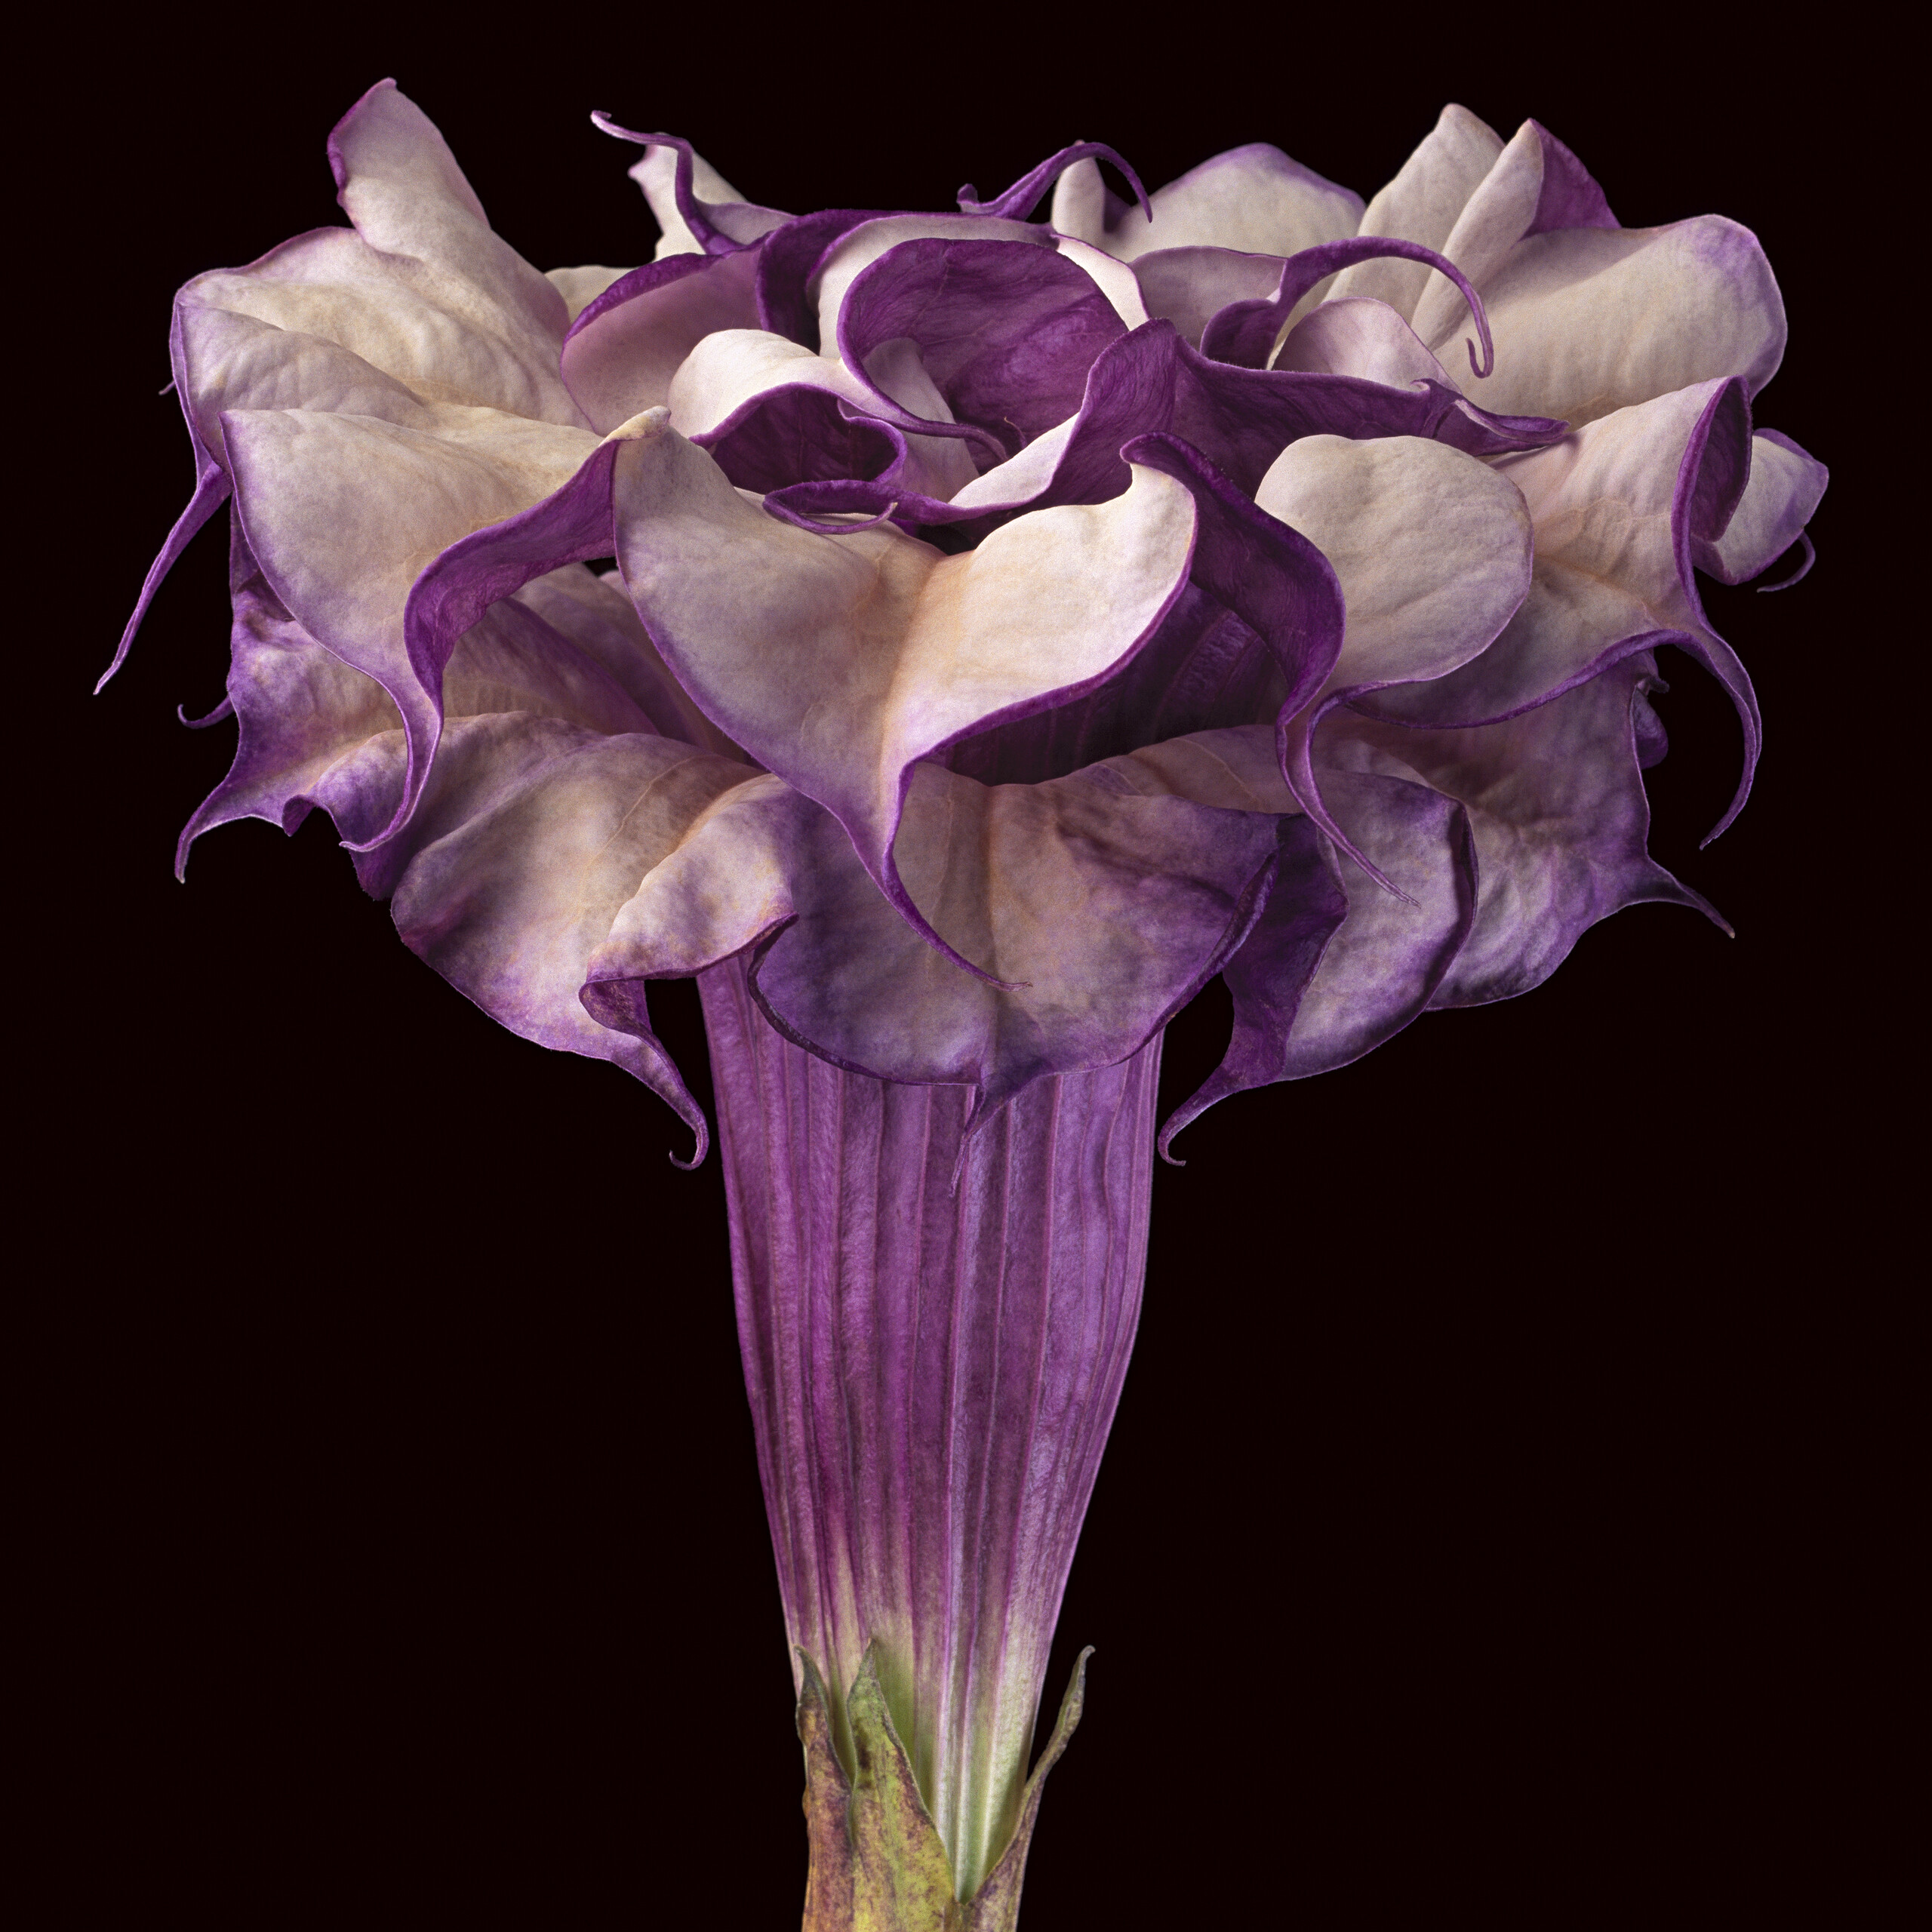 Close-up photograph shows a trumpet-shaped flower against a dark black background. The flower's striated, long neck erupts in a profusion of purple and white petals that dominate the composition.